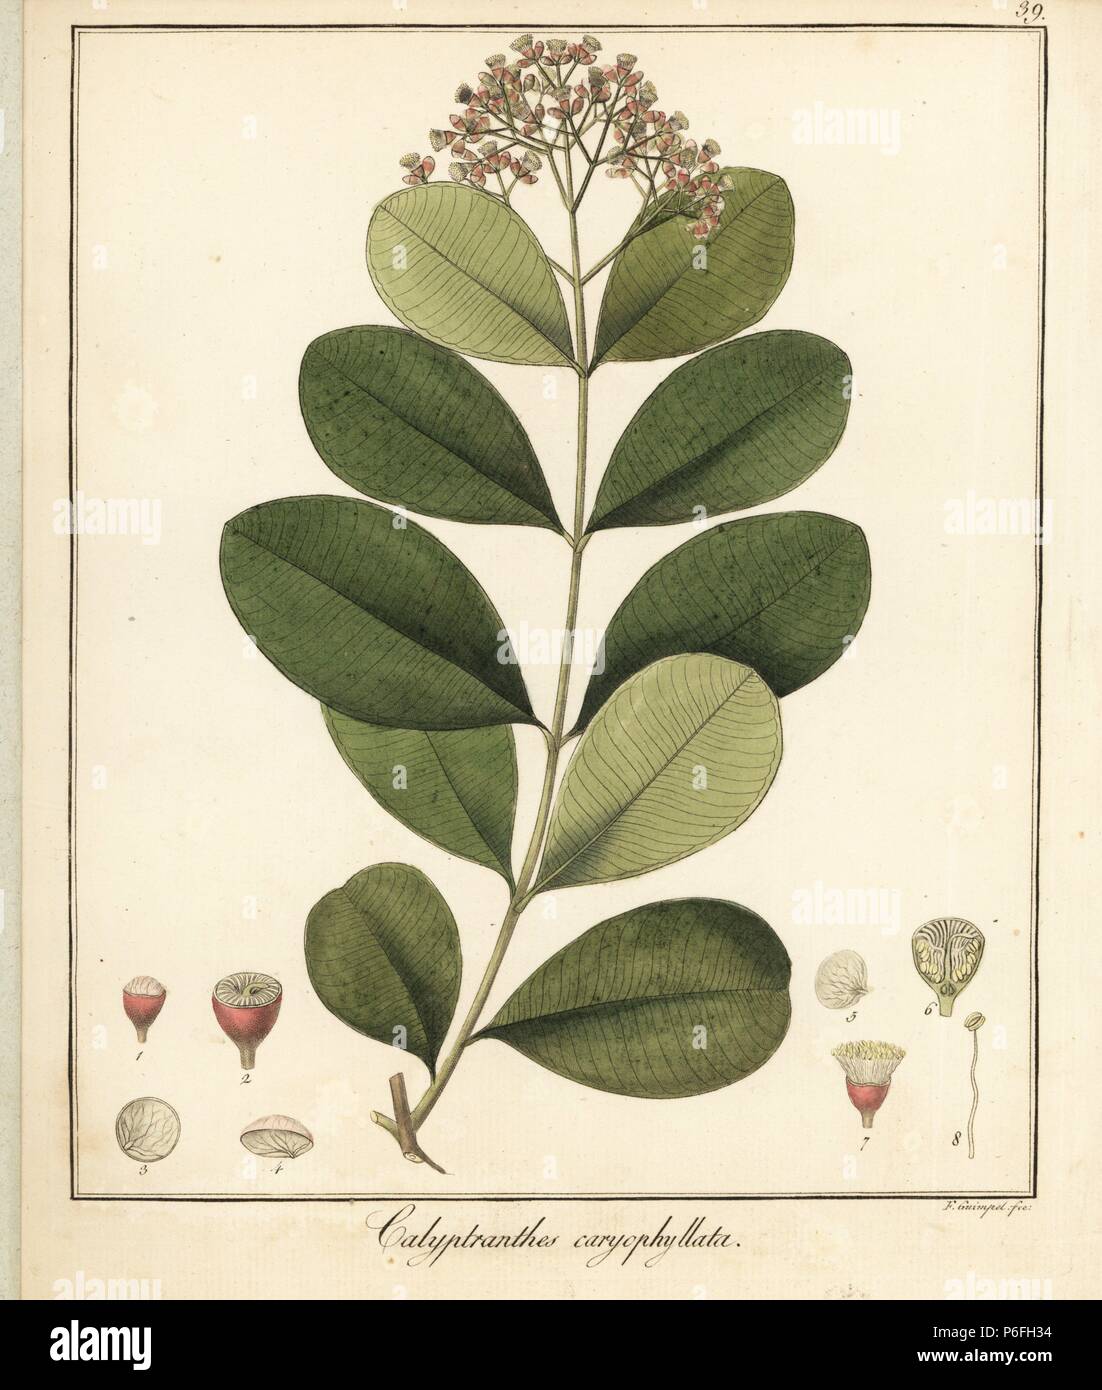 Wild black plum, Syzygium caryophyllatum. Native to Sri Lanka. Endangered. Handcoloured copperplate engraving by F. Guimpel from Dr. Friedrich Gottlob Hayne's Medical Botany, Berlin, 1822. Hayne (1763-1832) was a German botanist, apothecary and professor of pharmaceutical botany at Berlin University. Stock Photo